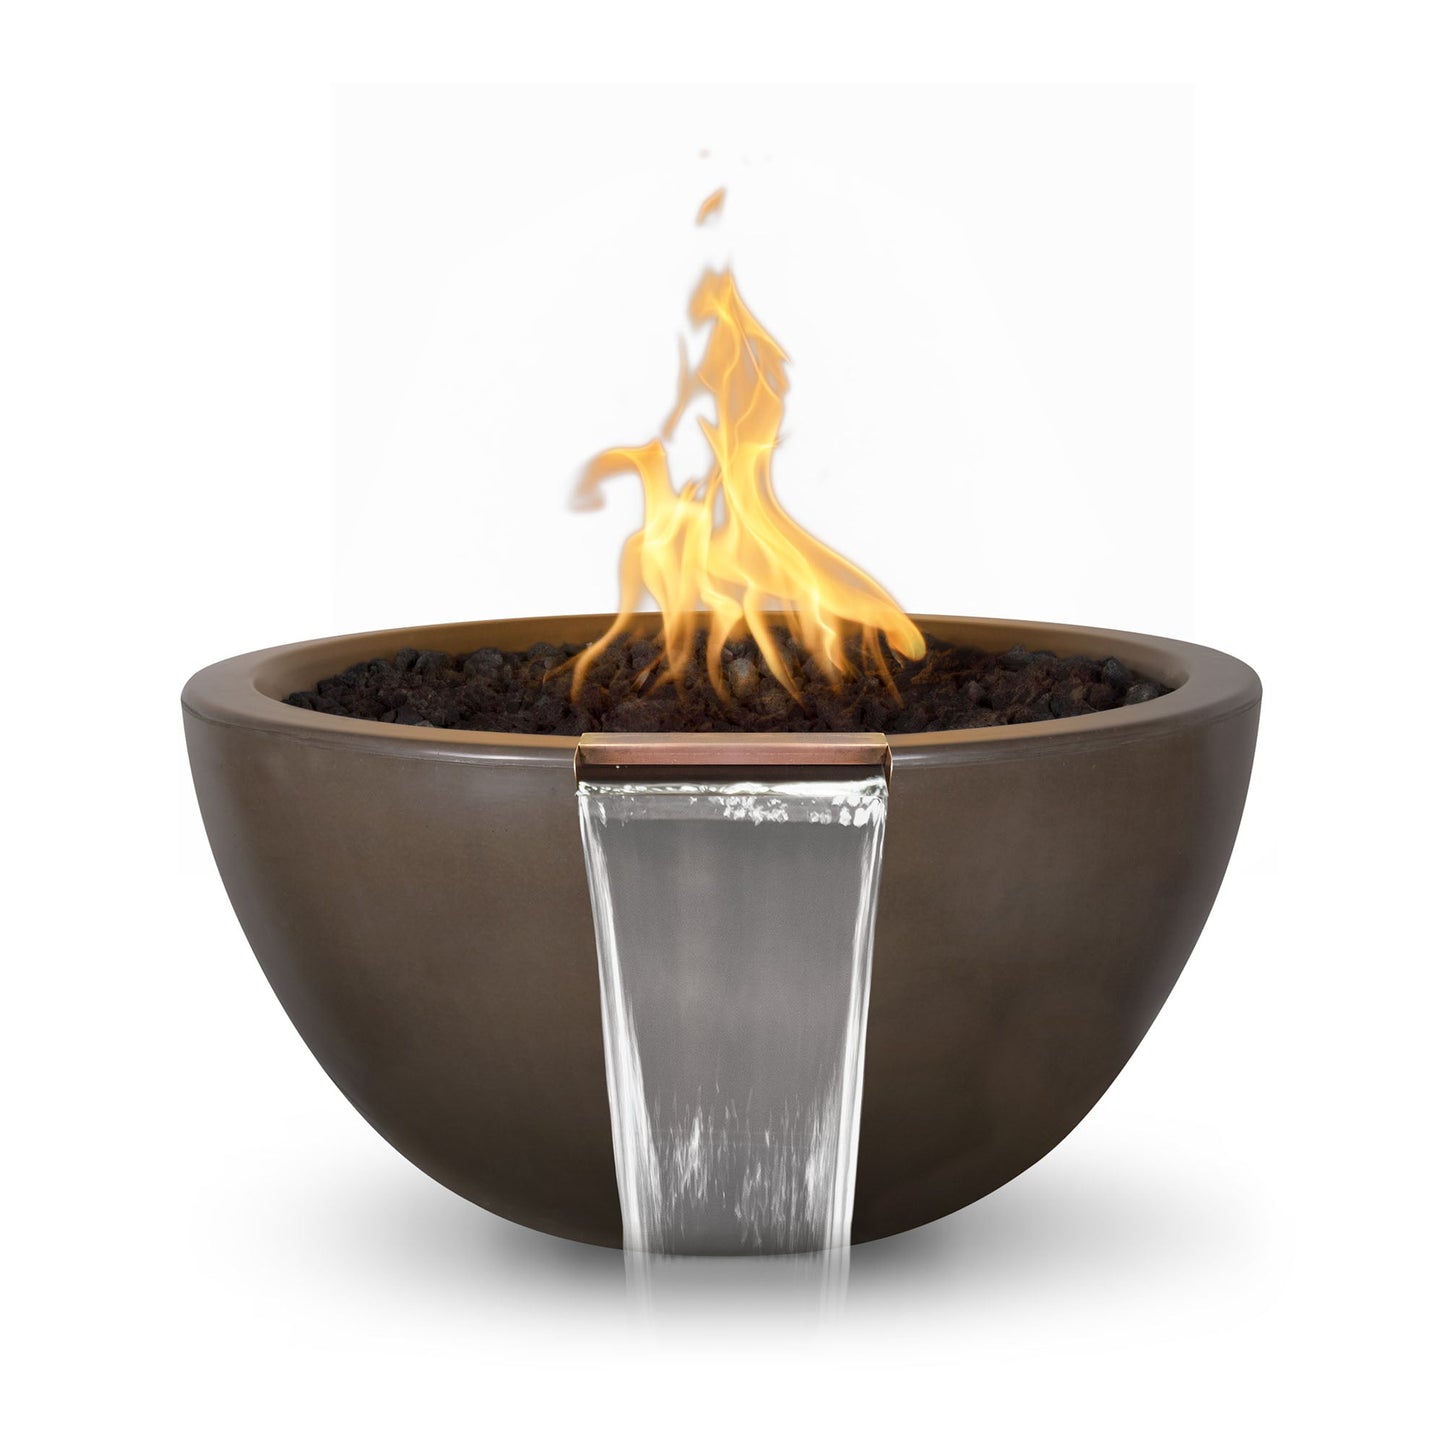 The Outdoor Plus Round Luna 38" Gray GFRC Concrete Natural Gas Fire & Water Bowl with Match Lit with Flame Sense Ignition